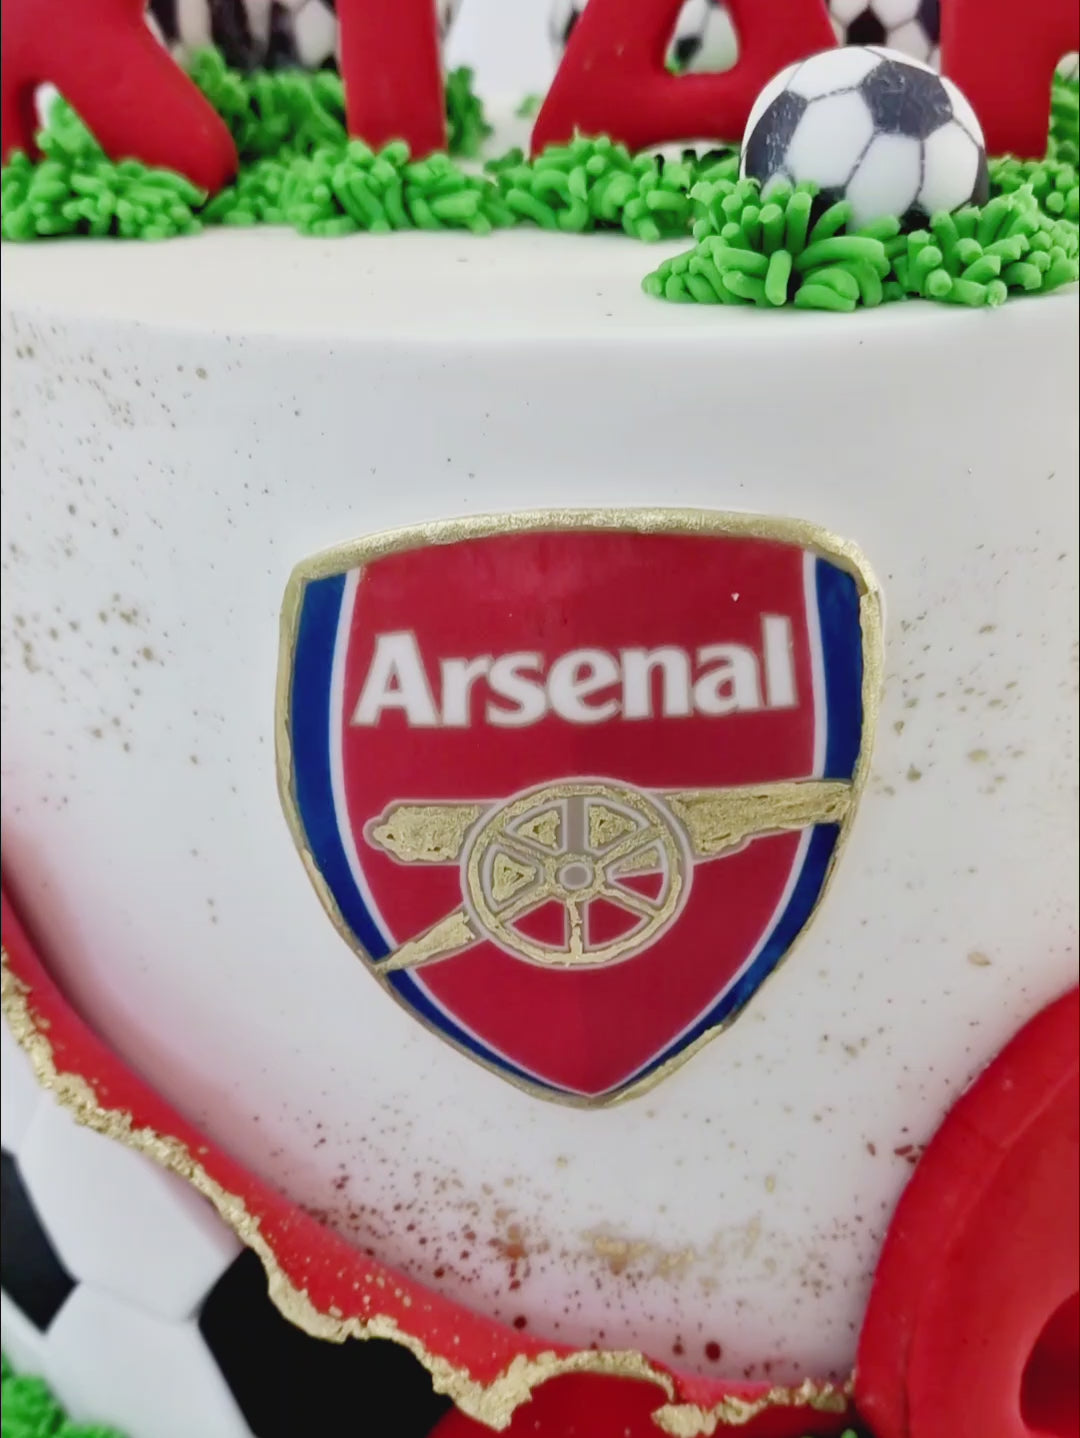 Arsenal Logo Cake Made For My Sons 10Th Birthday In April He Insisted On  Helping With The Logo Cutting Out The The Logo Despite Wriggly -  CakeCentral.com